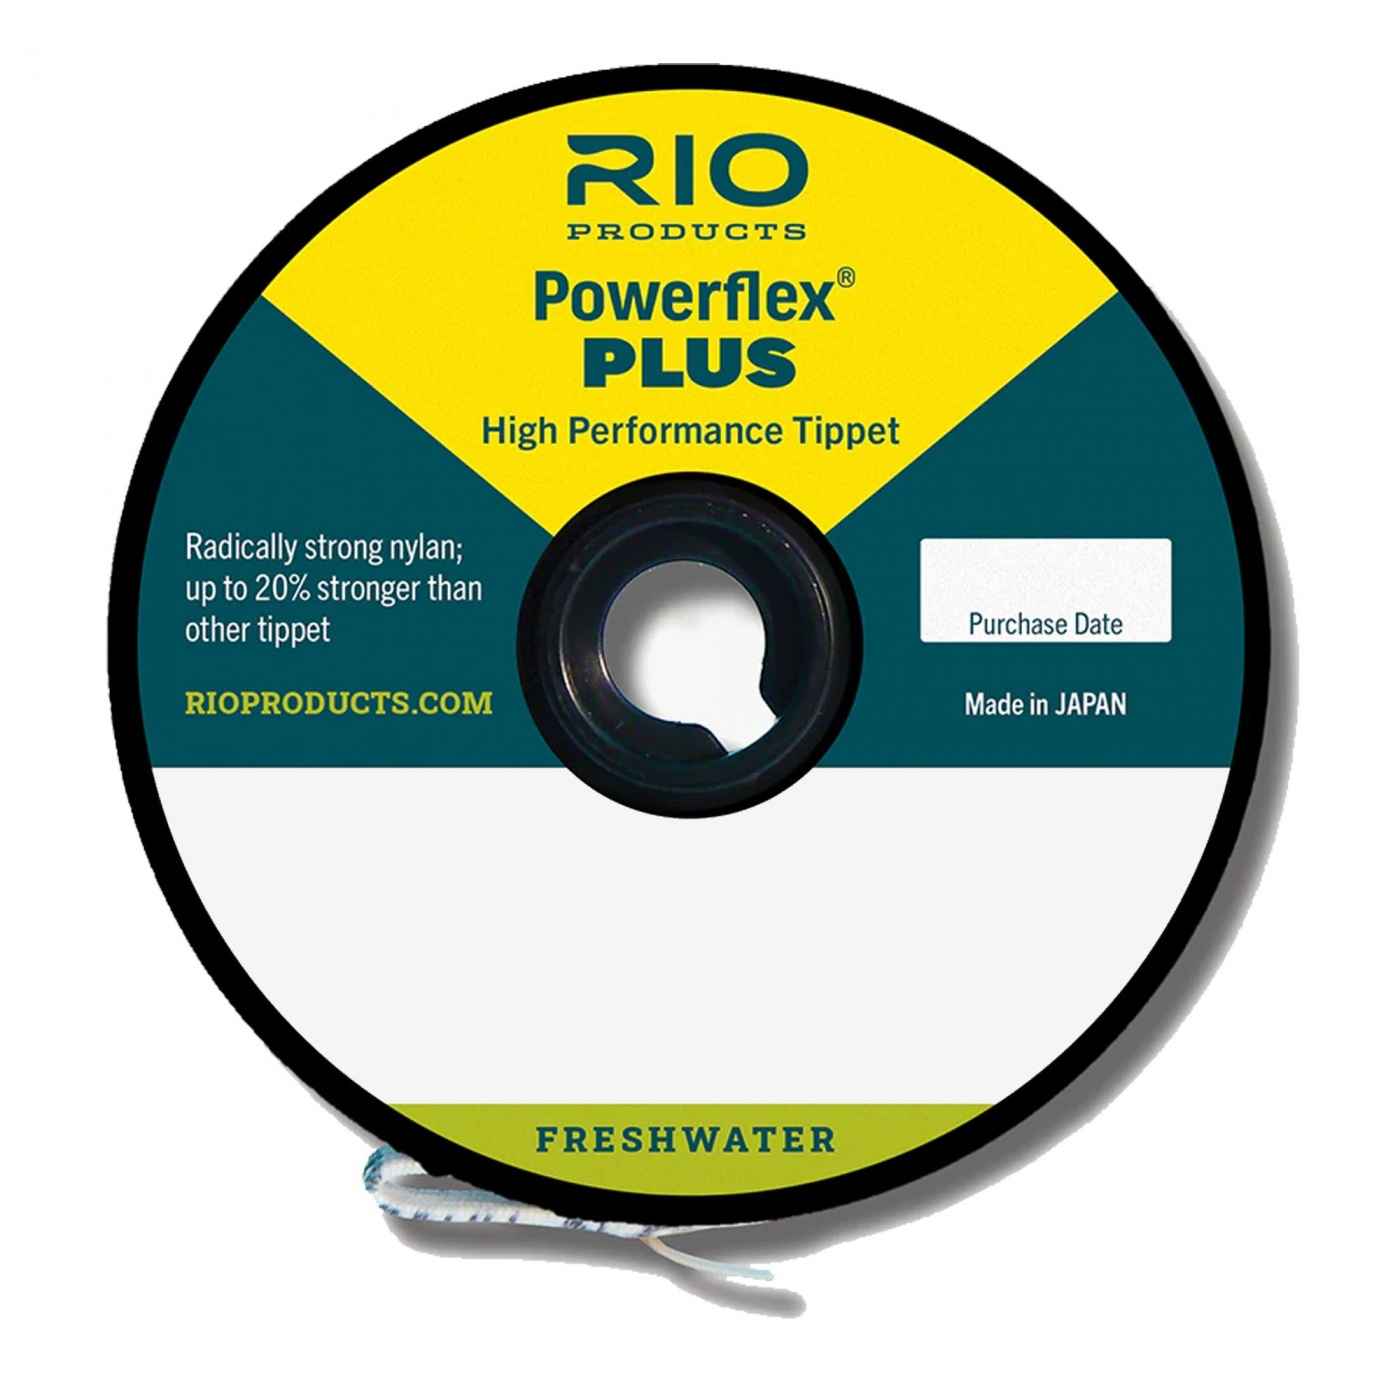 Rio Products Powerflex Plus Tippet 3X 9.5lb / 4.3kg For Trout & Grayling Fly Fishing